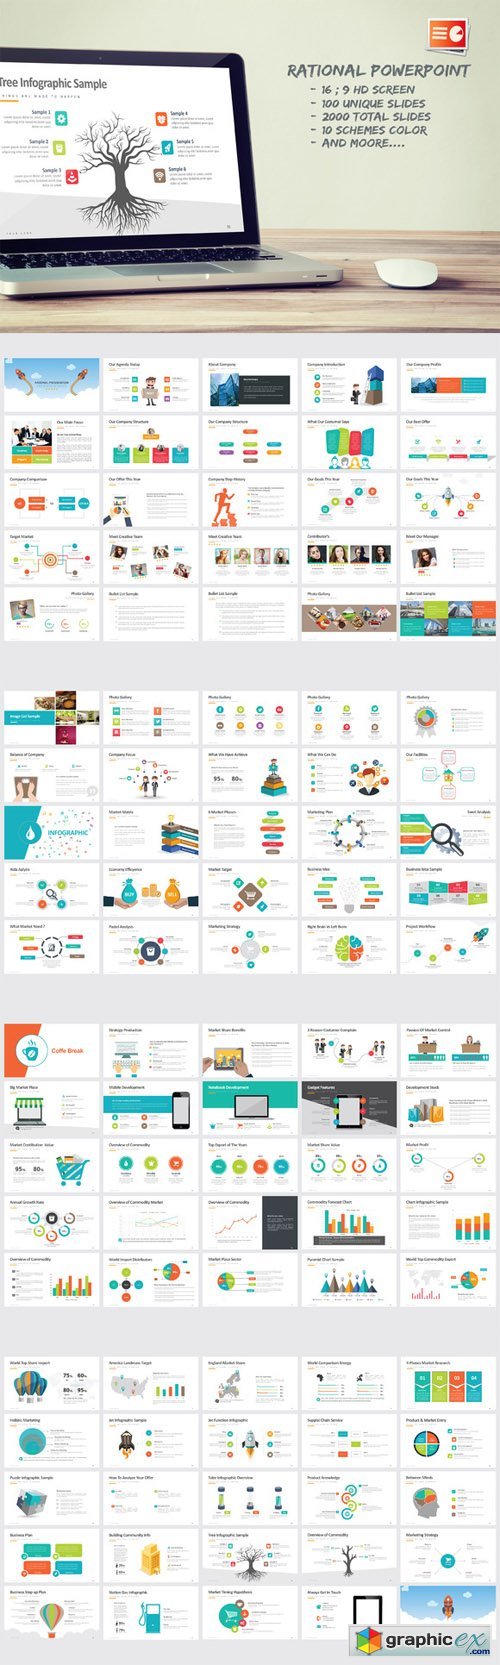 Rational Powerpoint Template